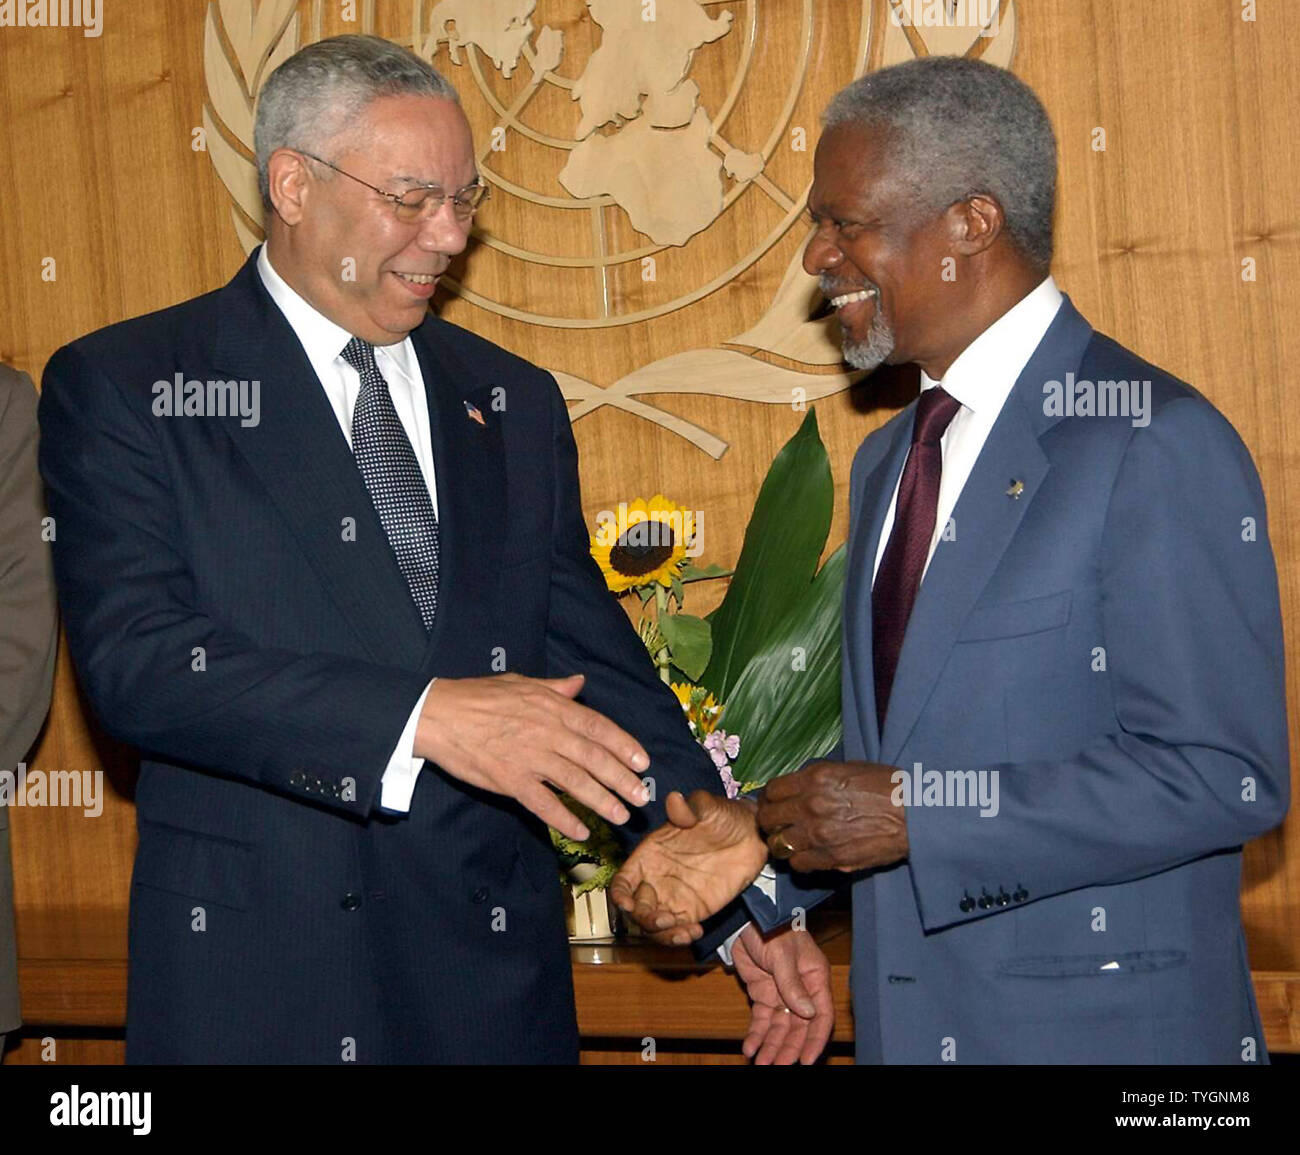 UN Secretary General Kofi Annan and US Secretary of State Colin Powell (left) meet for consulations and a joint press conference on July 22, 2004 on efforts to aid Sudan (UPI Photo/Ezio Petersen) Stock Photo